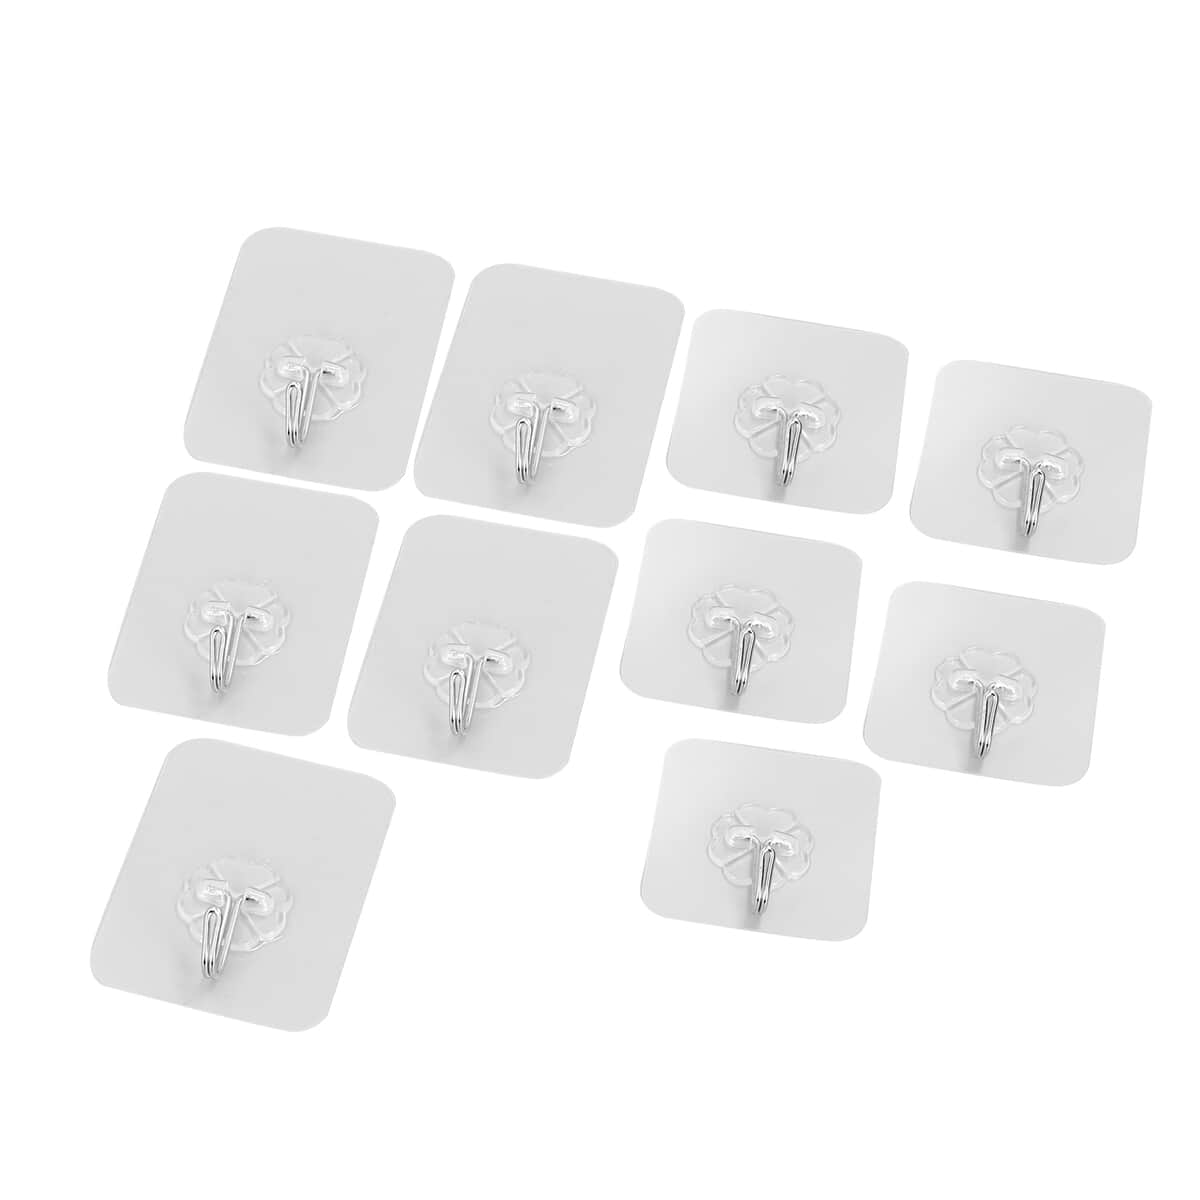 Buy Set of 10 Transparent removable Magic hooks, Self-Adhesive Heavy Duty  Without Nails Hooks for Kitchen, Bathroom, Door Wall at ShopLC.